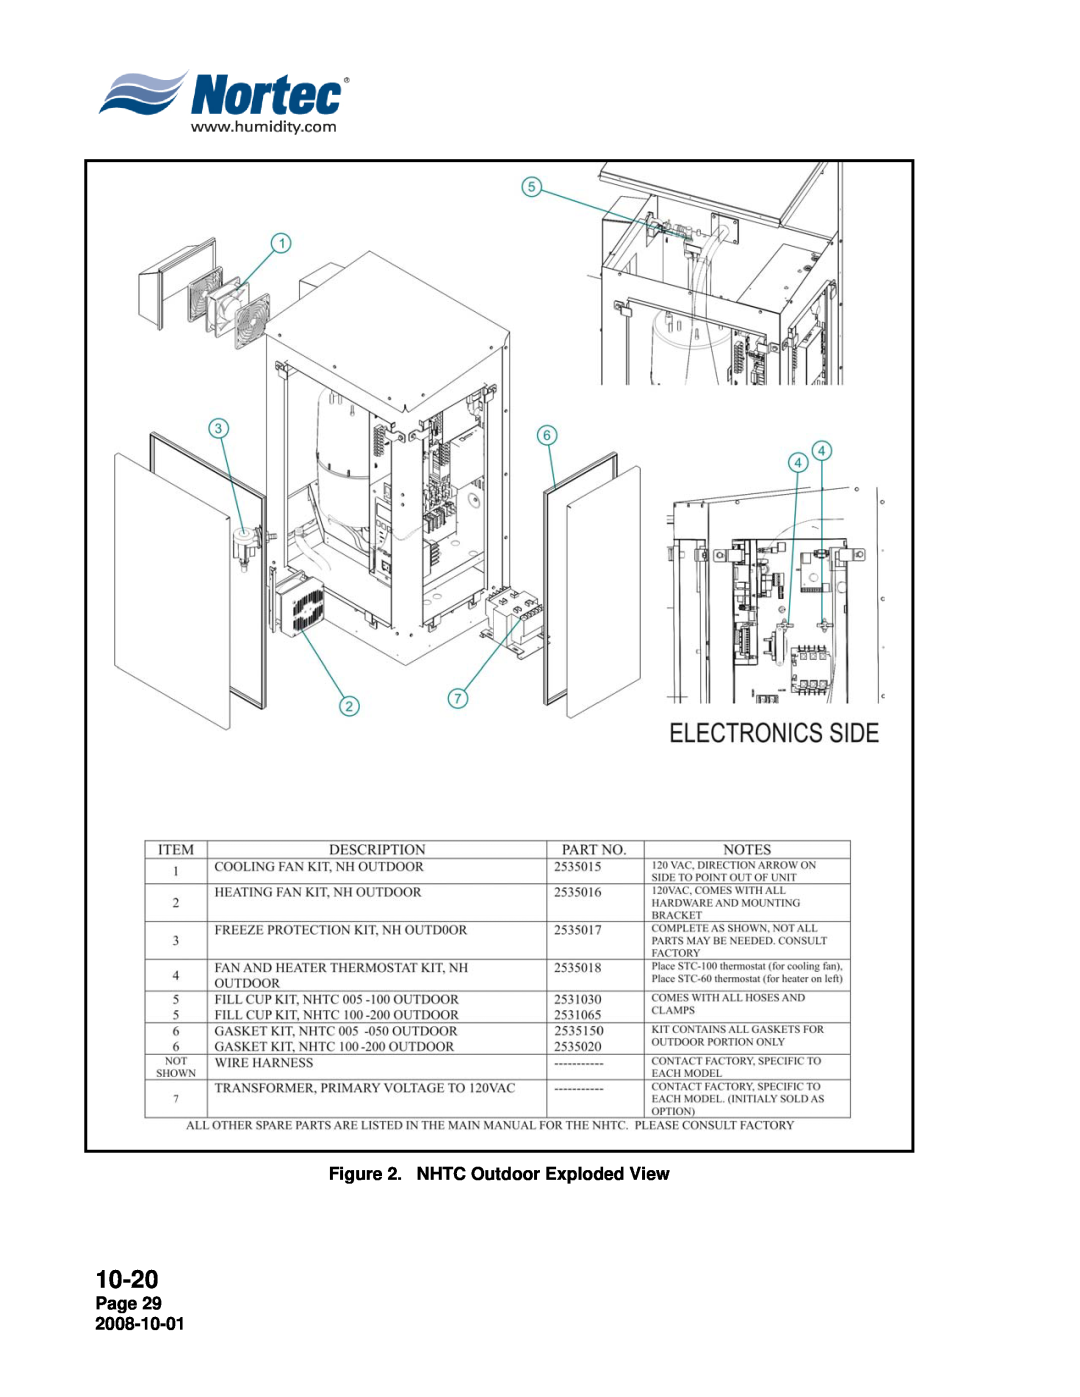 Nortec Industries NH Series installation manual 10-20, NHTC Outdoor Exploded View, Page 